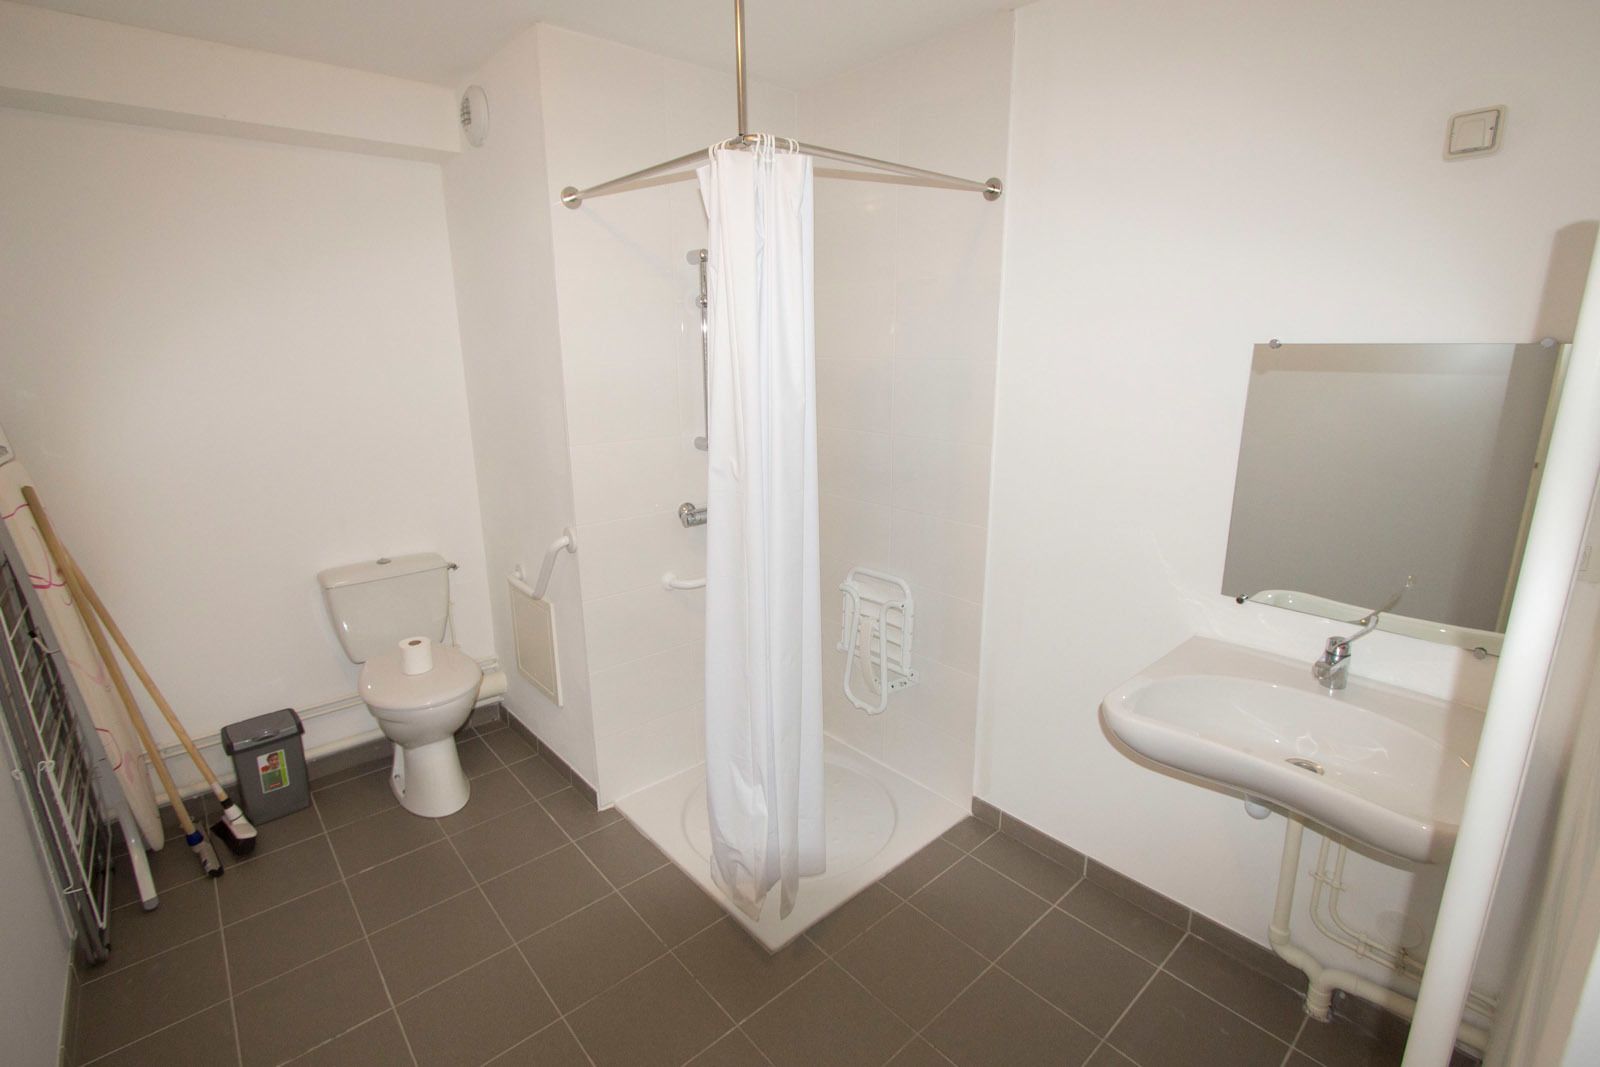 Suite for 2 people, adapted to people with a disability